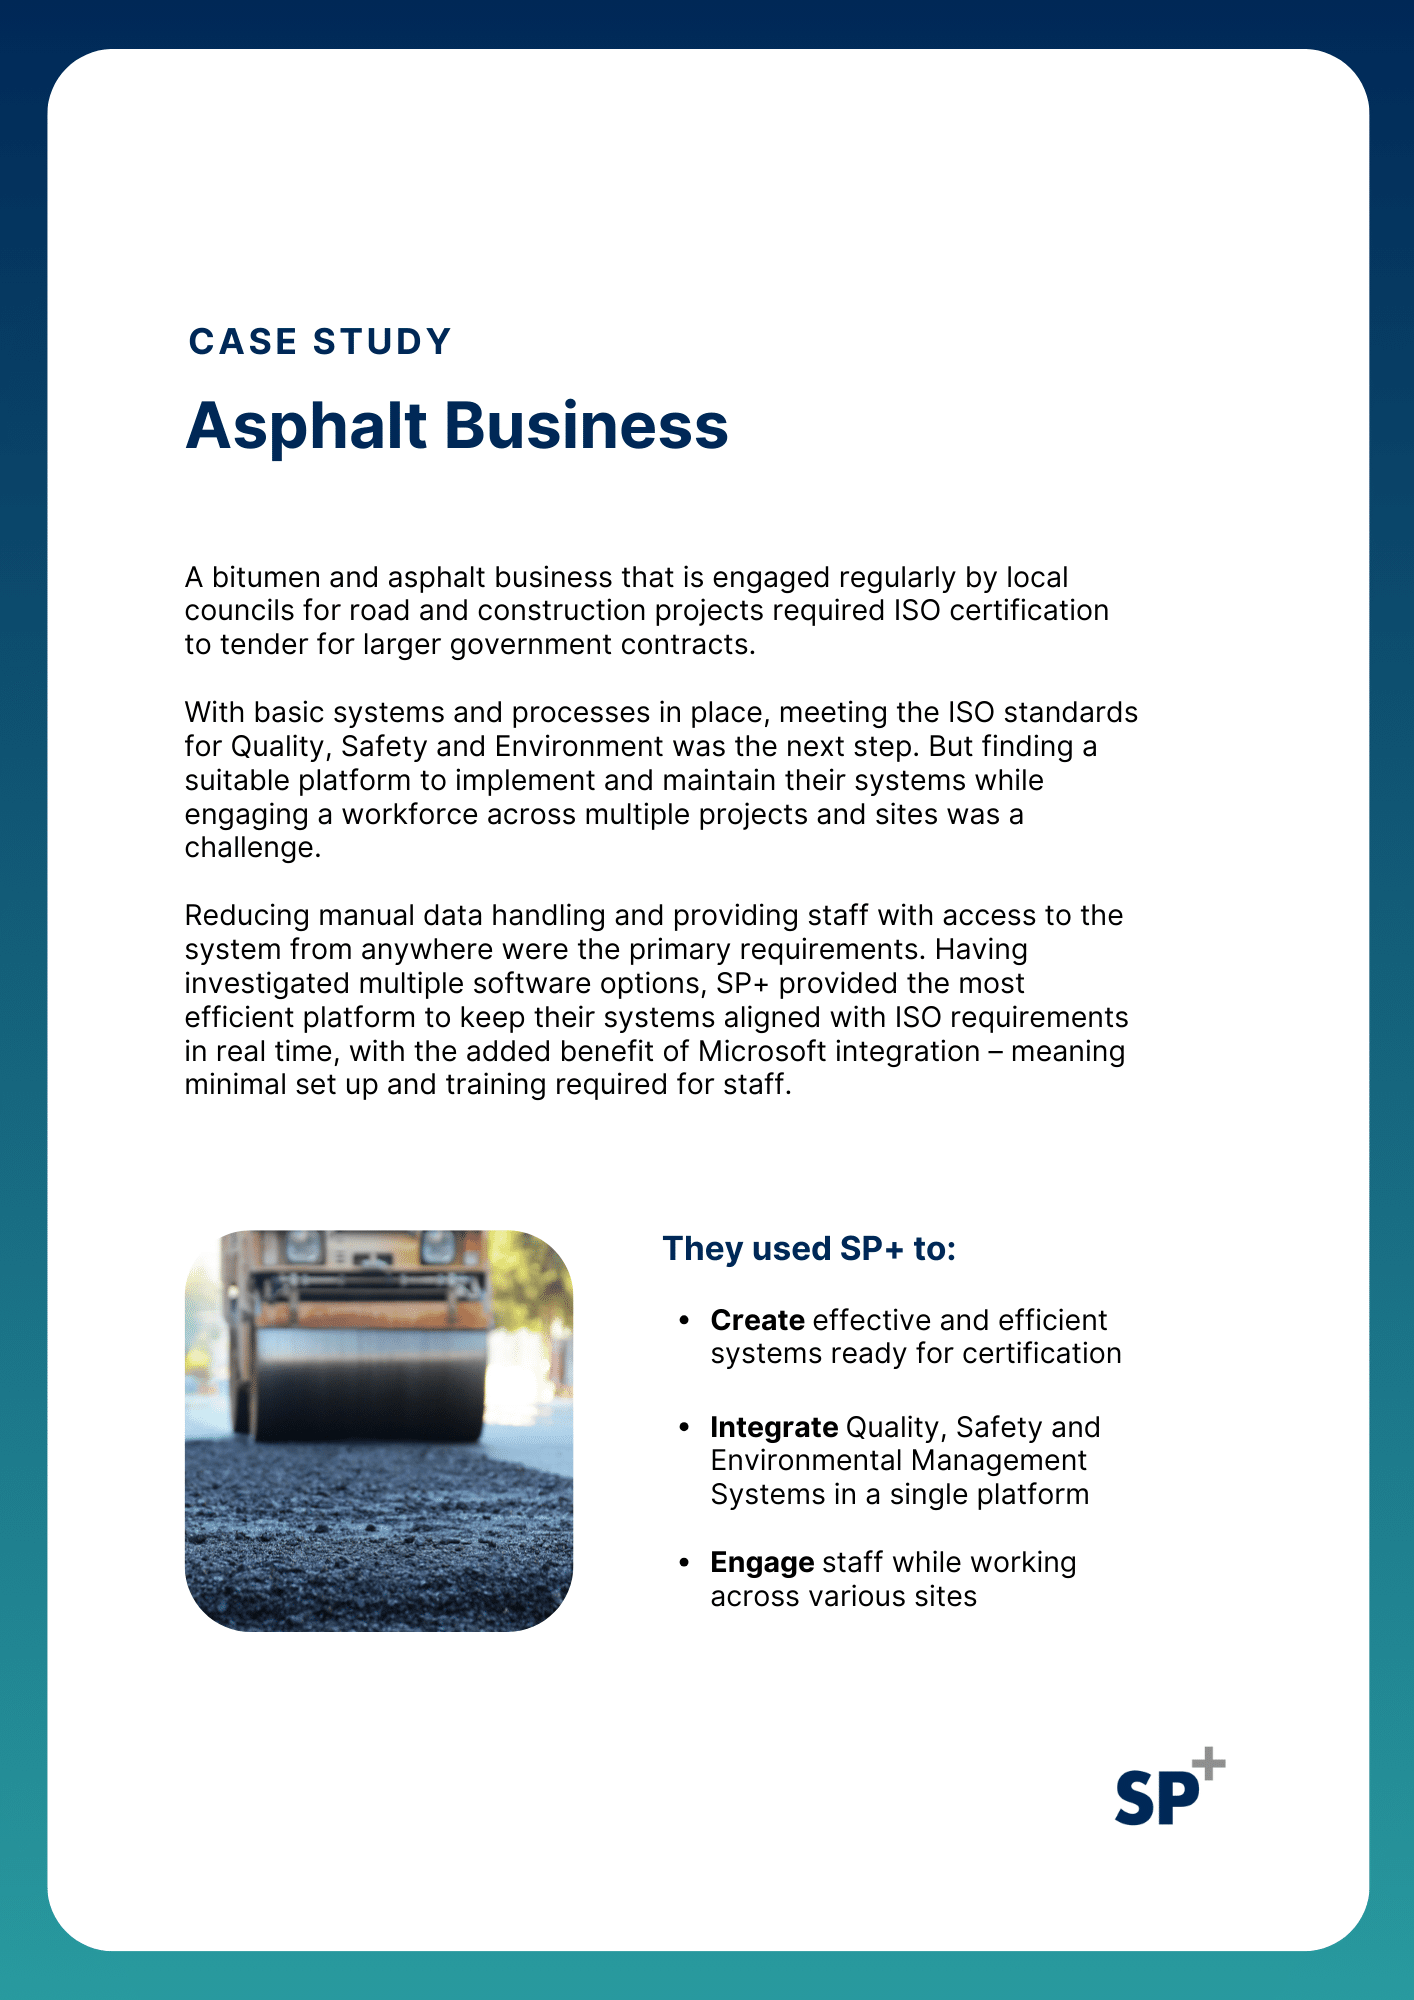 Case Study of an Asphalt business using SP+ to integrate Quality, safety and environmental systems in a single platform.